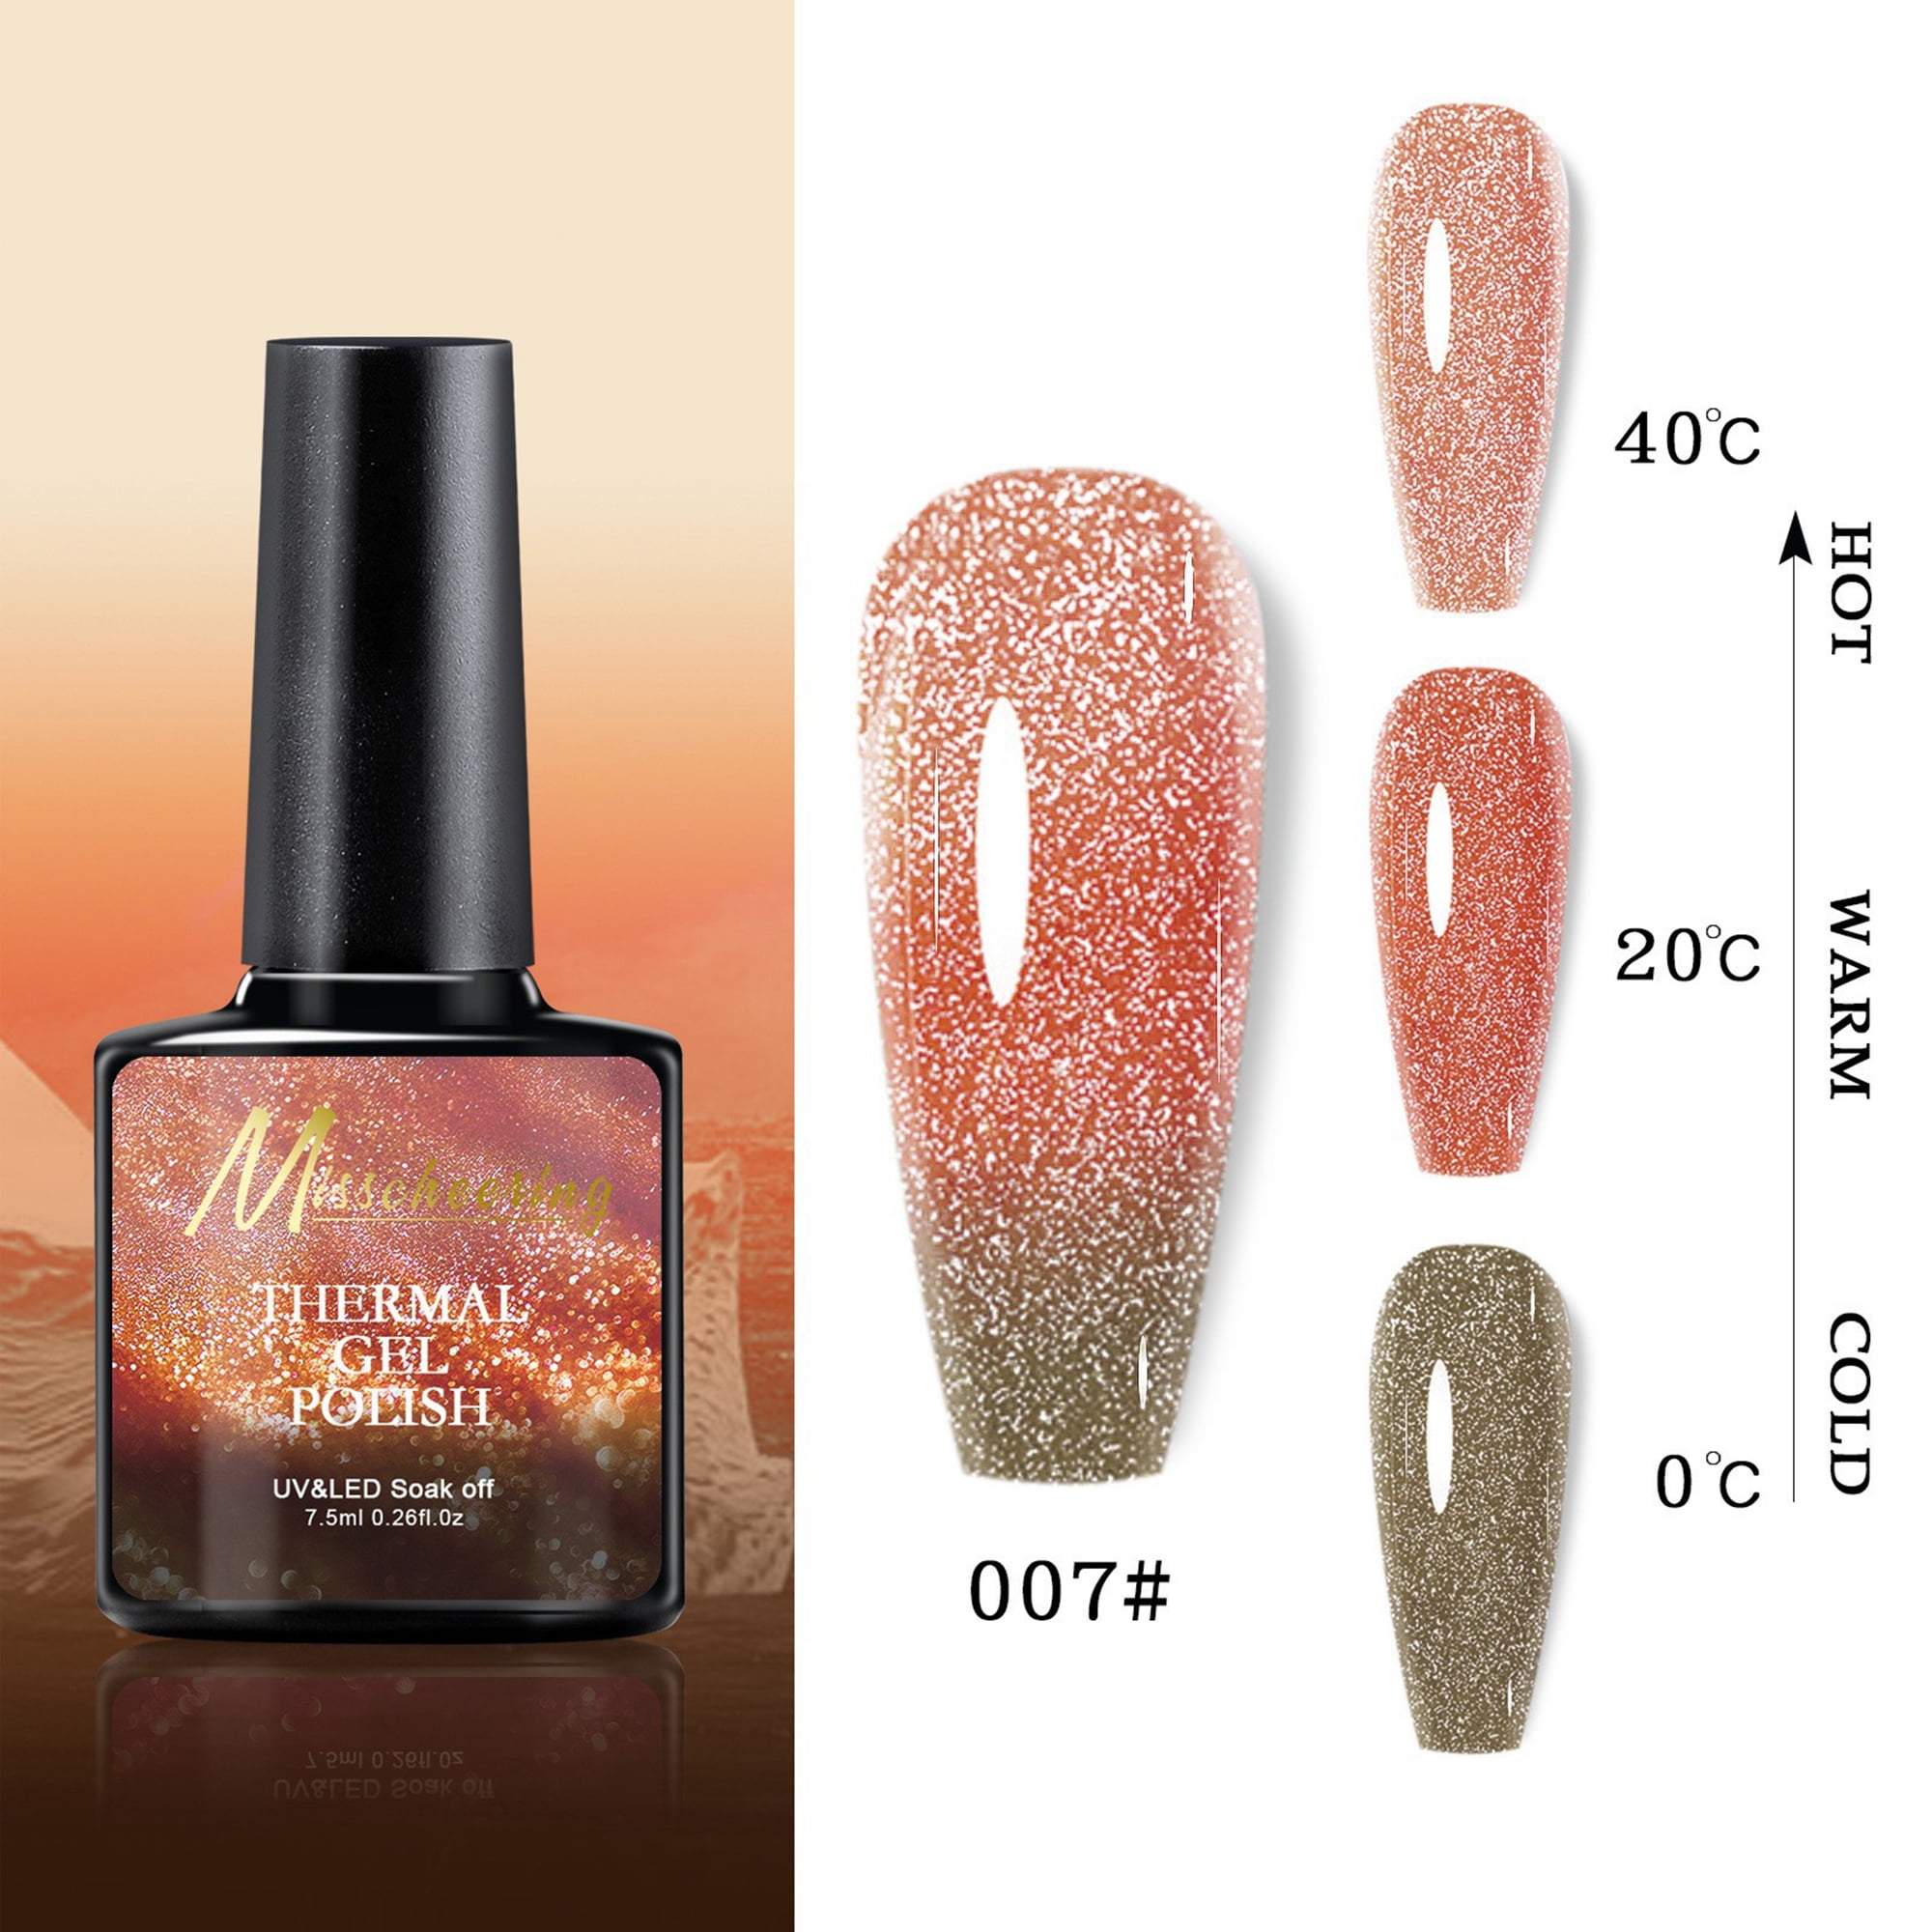 Buy Elite99 Thermal Temperature Color Changing Gel Polish Soak Off UV LED Nail  Polish Manicure Nail Art 7ml - 9047 Online at Low Prices in India -  Amazon.in